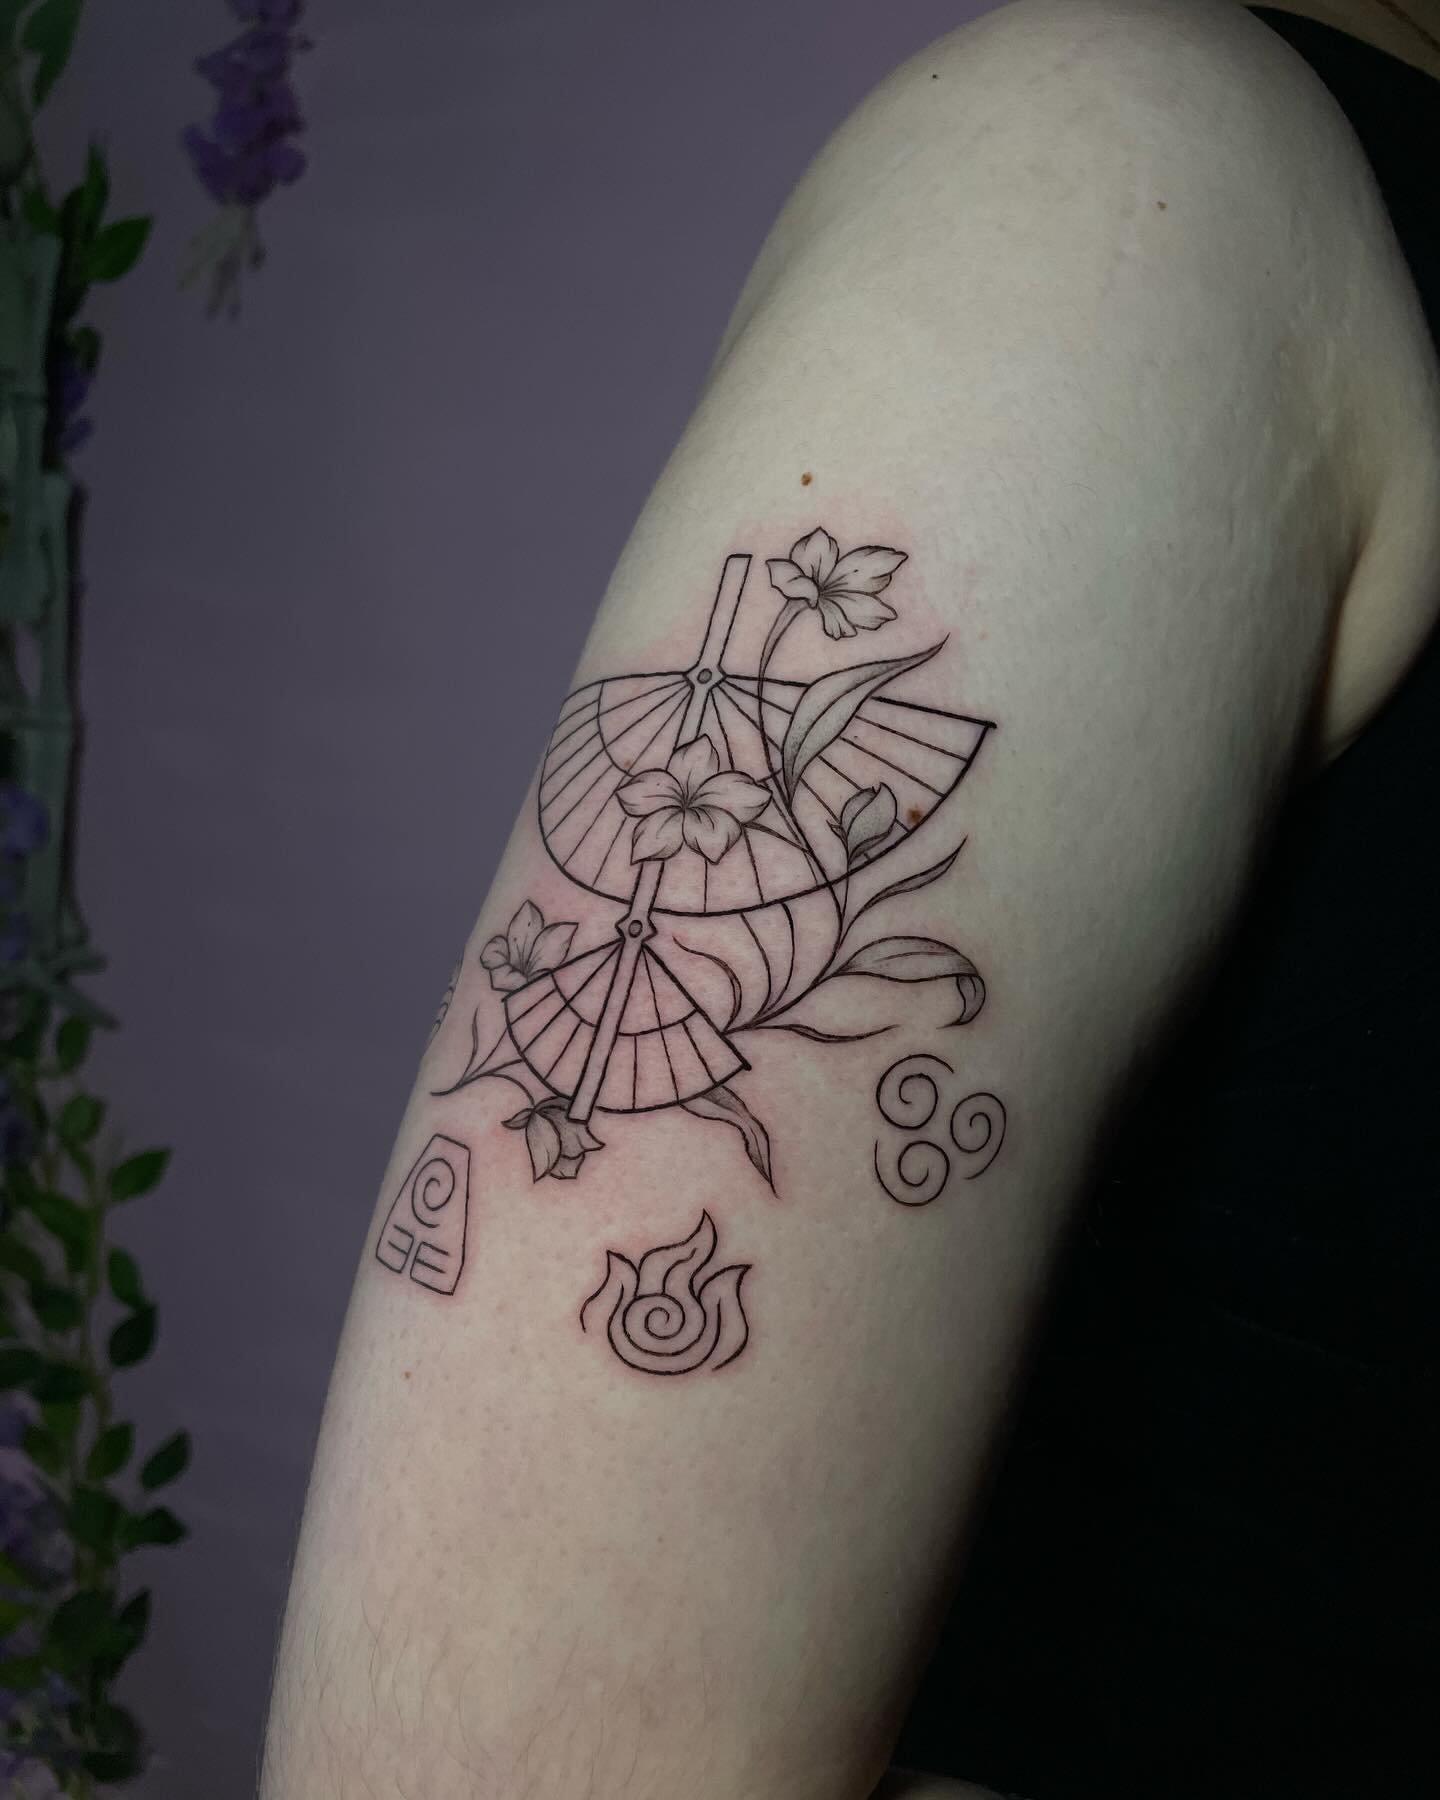 Aang&rsquo;s parasail fan and the elemental symbols 🌎 🔥 💦 🌬️ thank you so so much Simran! I&rsquo;m catching up on my emails, to get in the queue shoot me your ideas &mdash; honeylucktattoo@gmail.com 🩵 #avatarthelastairbender #avatartattoo #elem